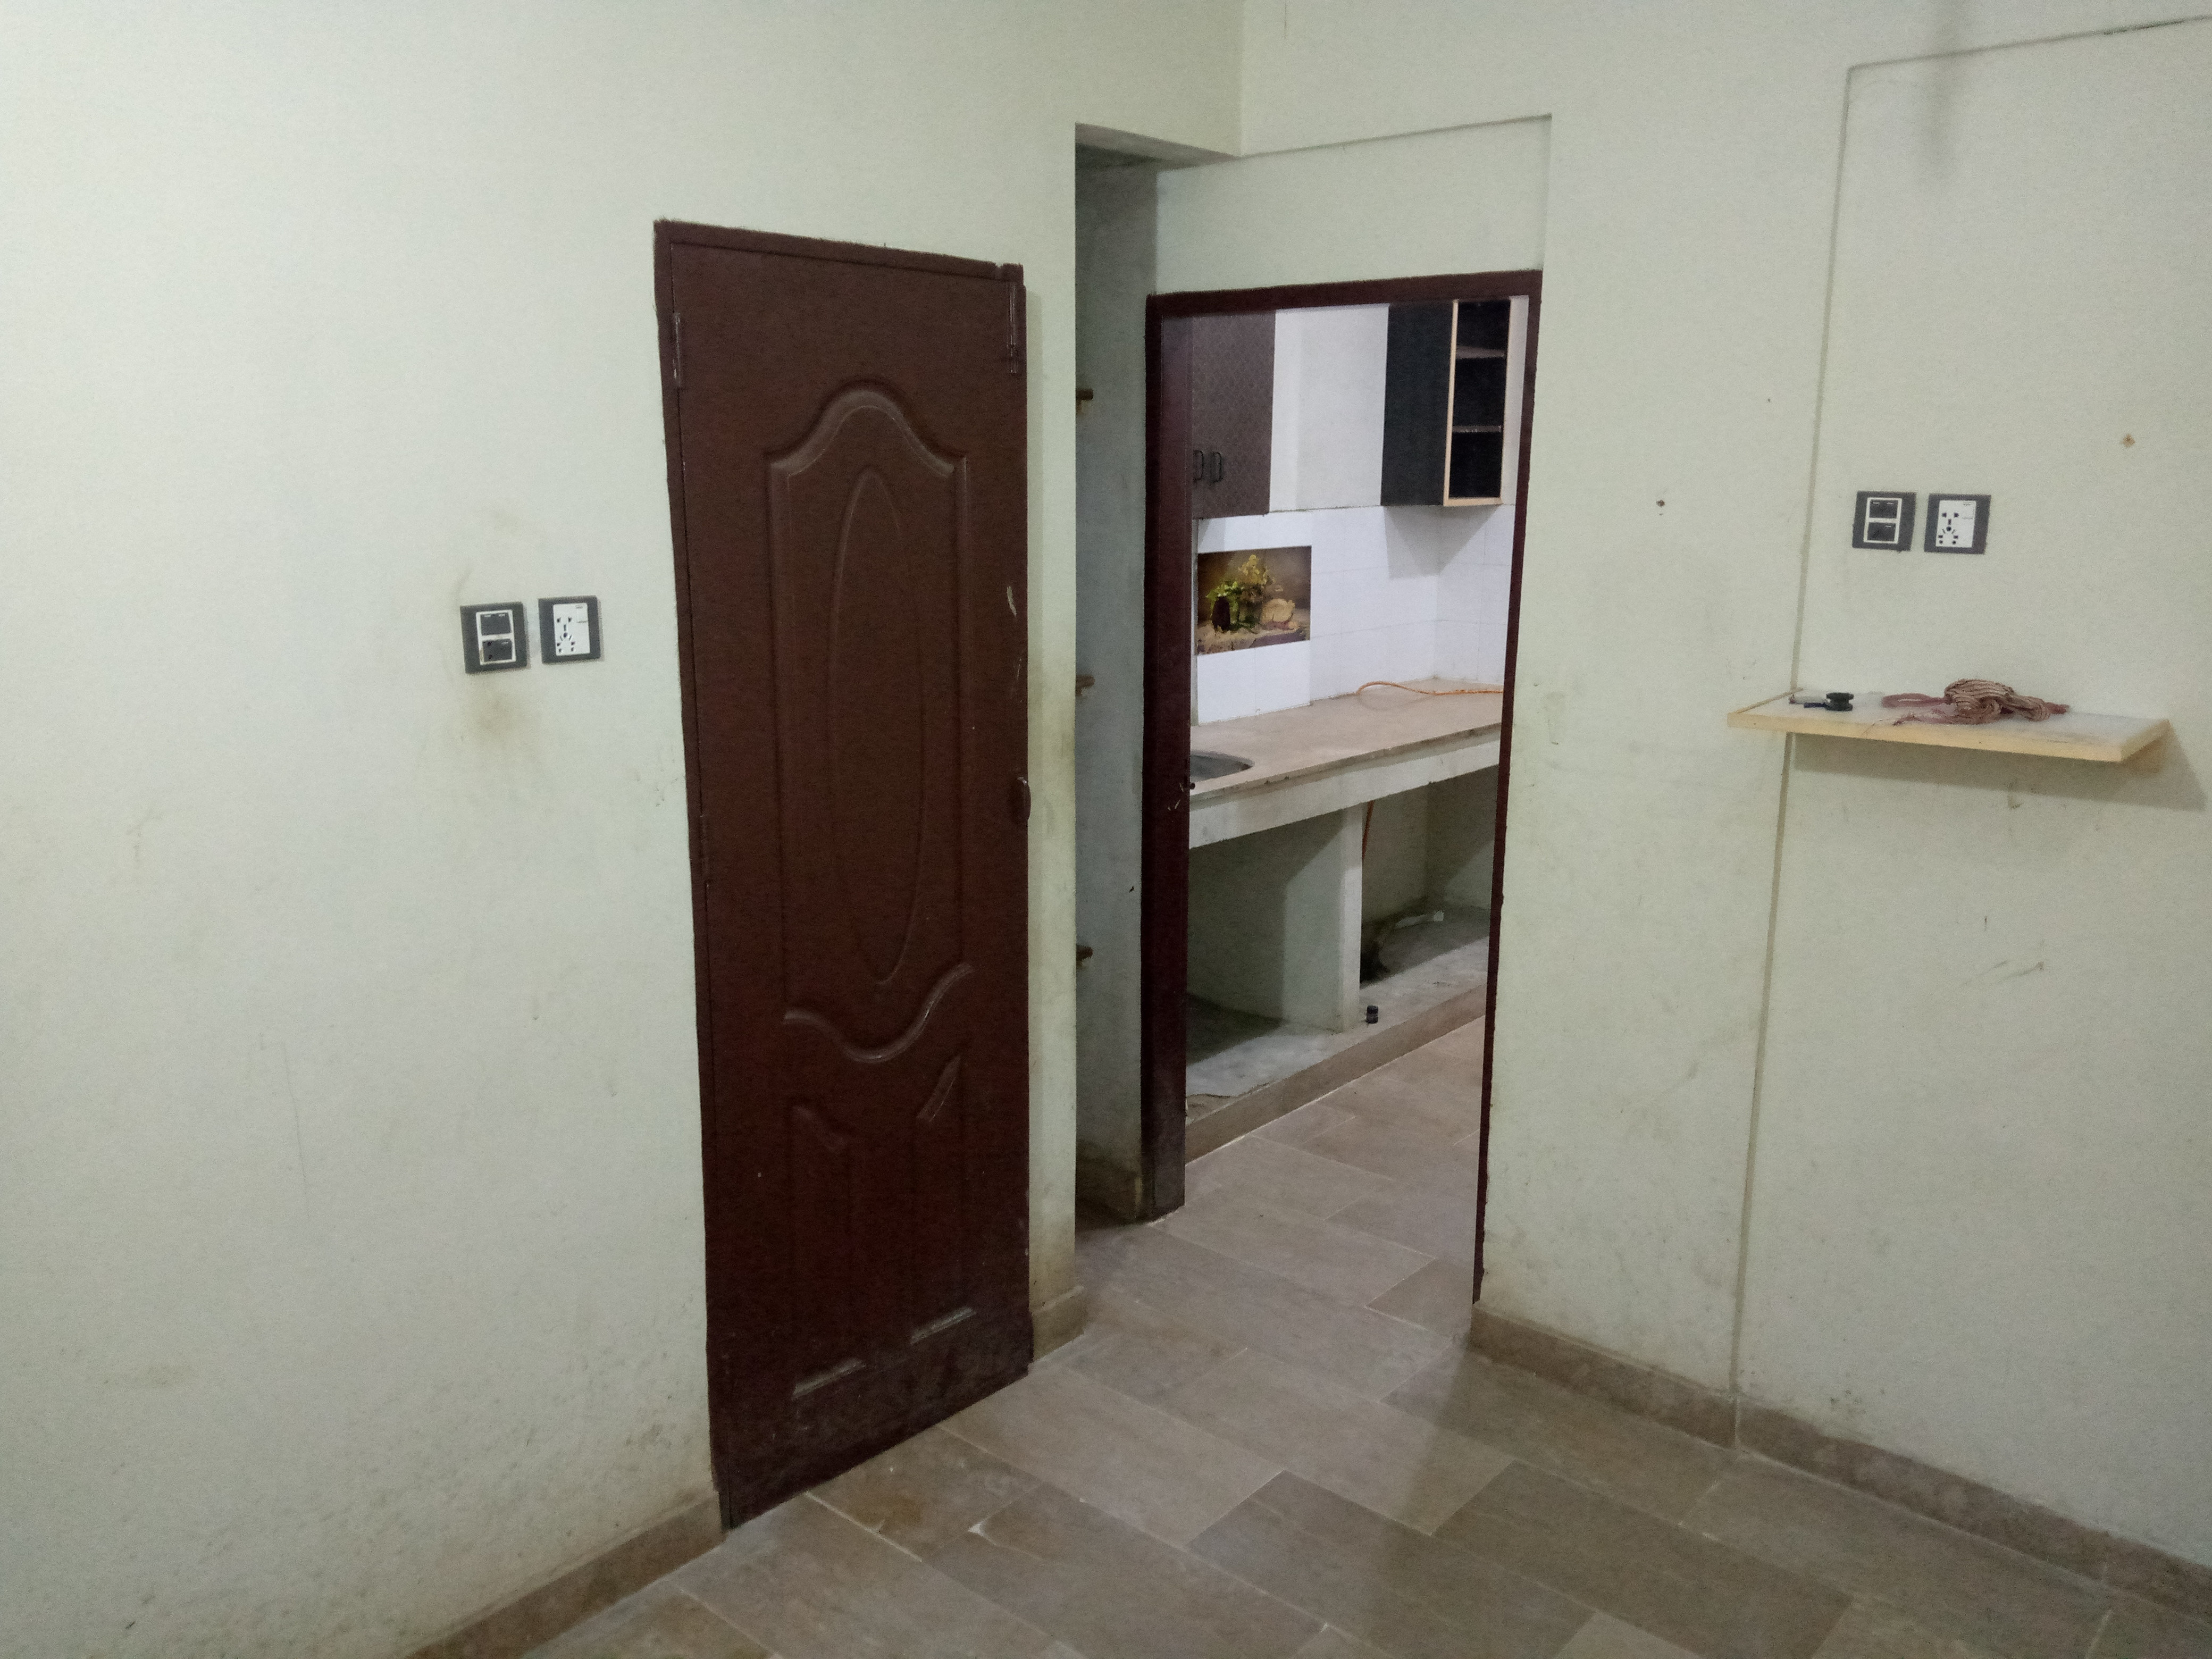 2 Bedroom + Bath Flat Available For Rent. 